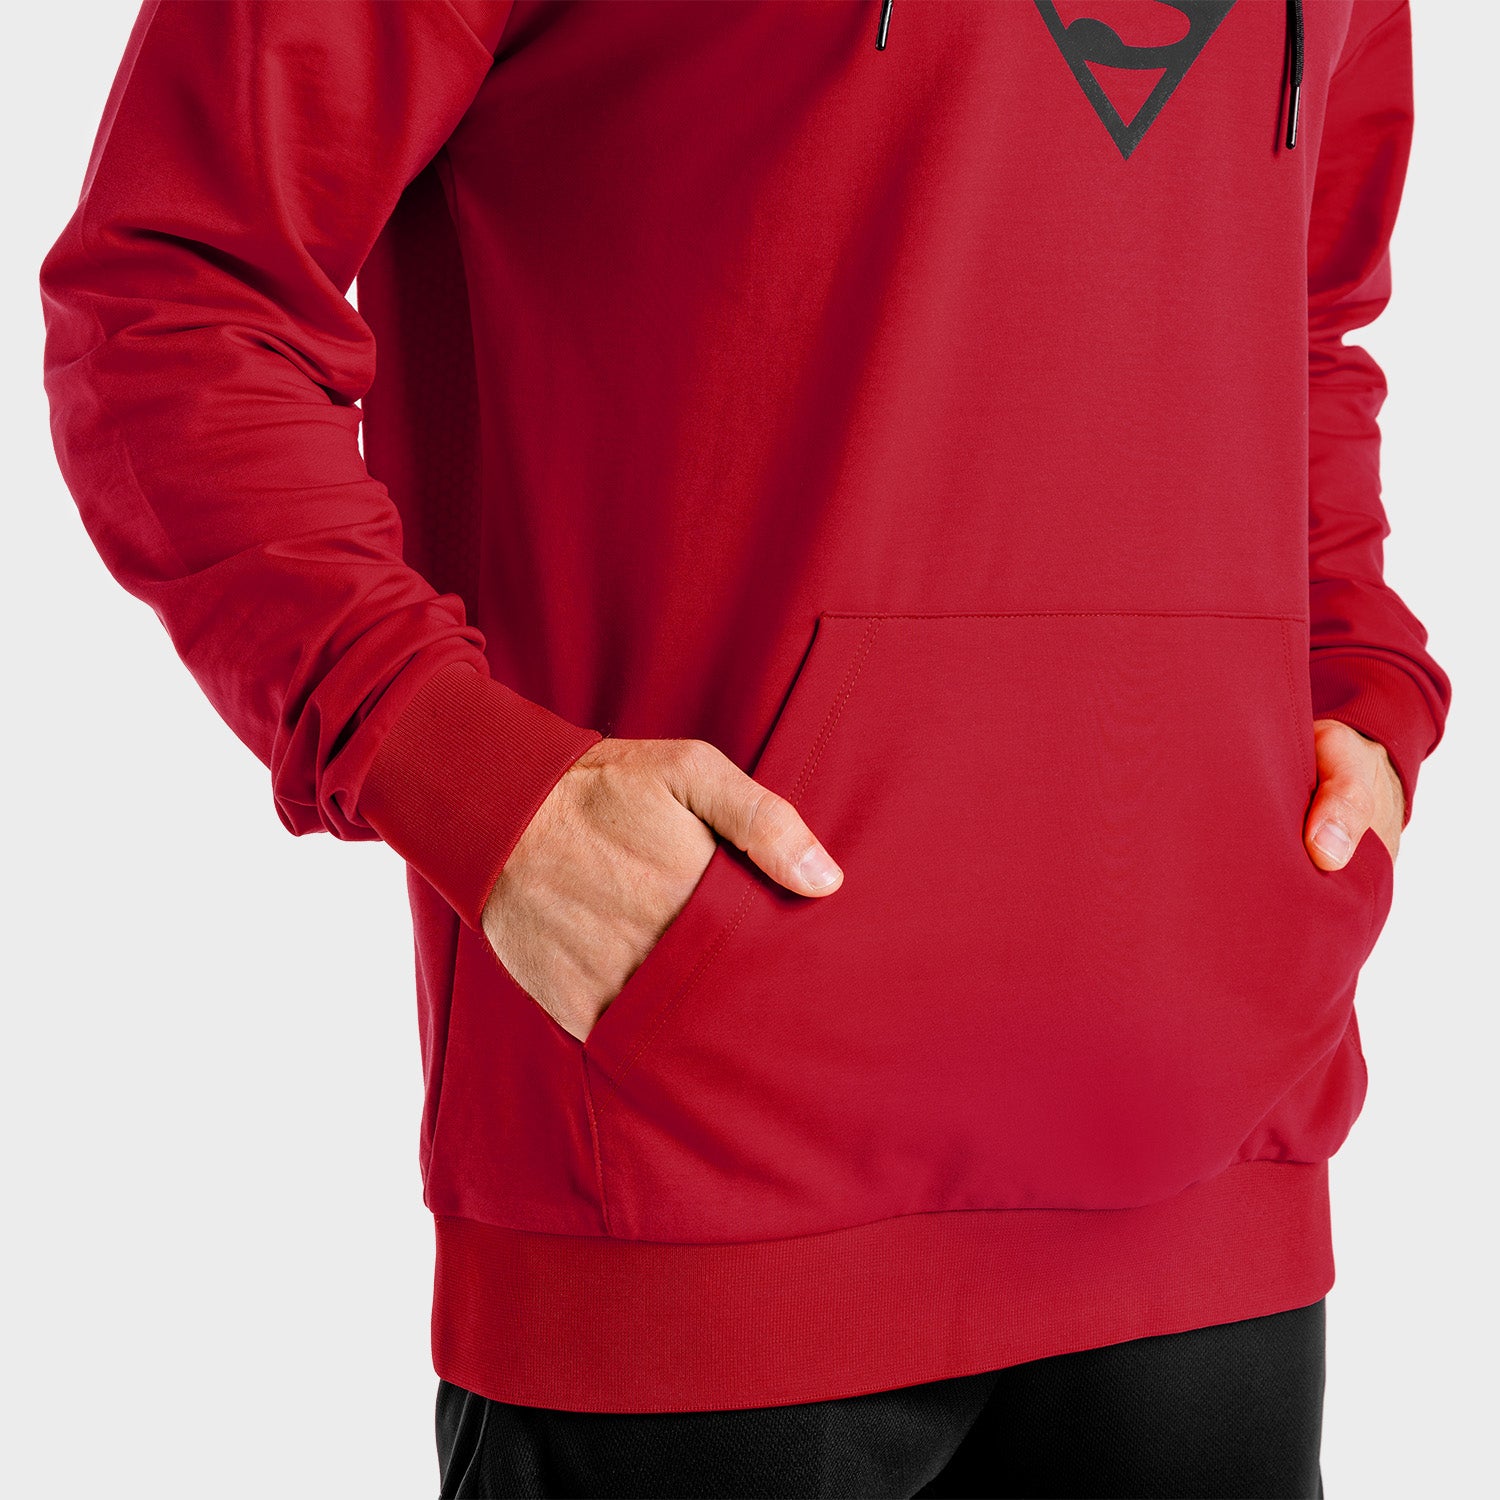 squatwolf-workout-hoodies-for-men-superman-gym-hoodie-red-gym-wear